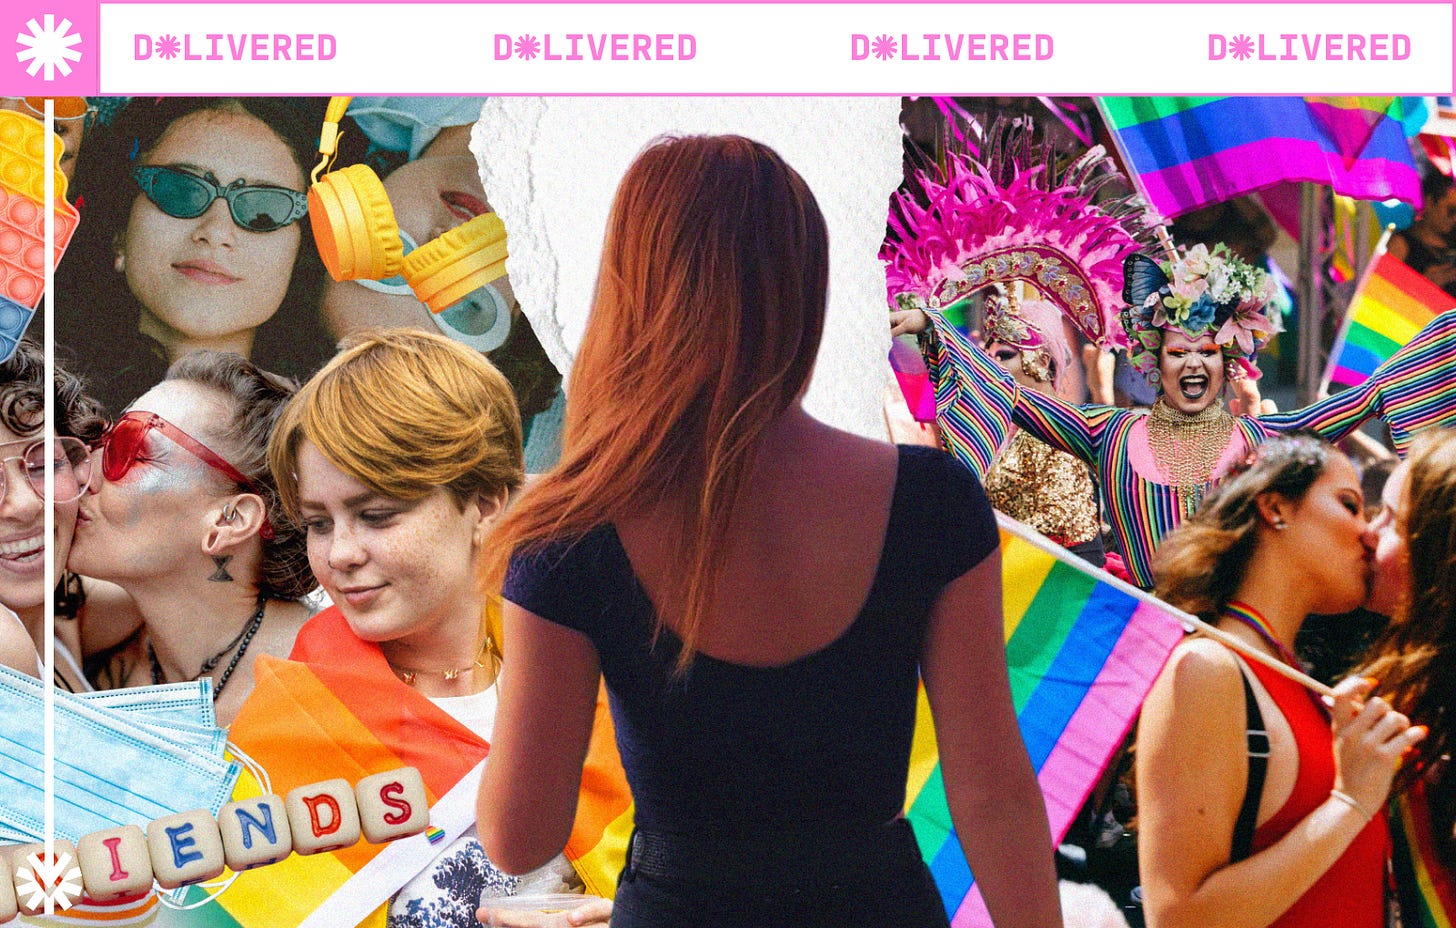 The back of a person with long red hair, among a collage of Pride imagery - including rainbow flags and people kissing.